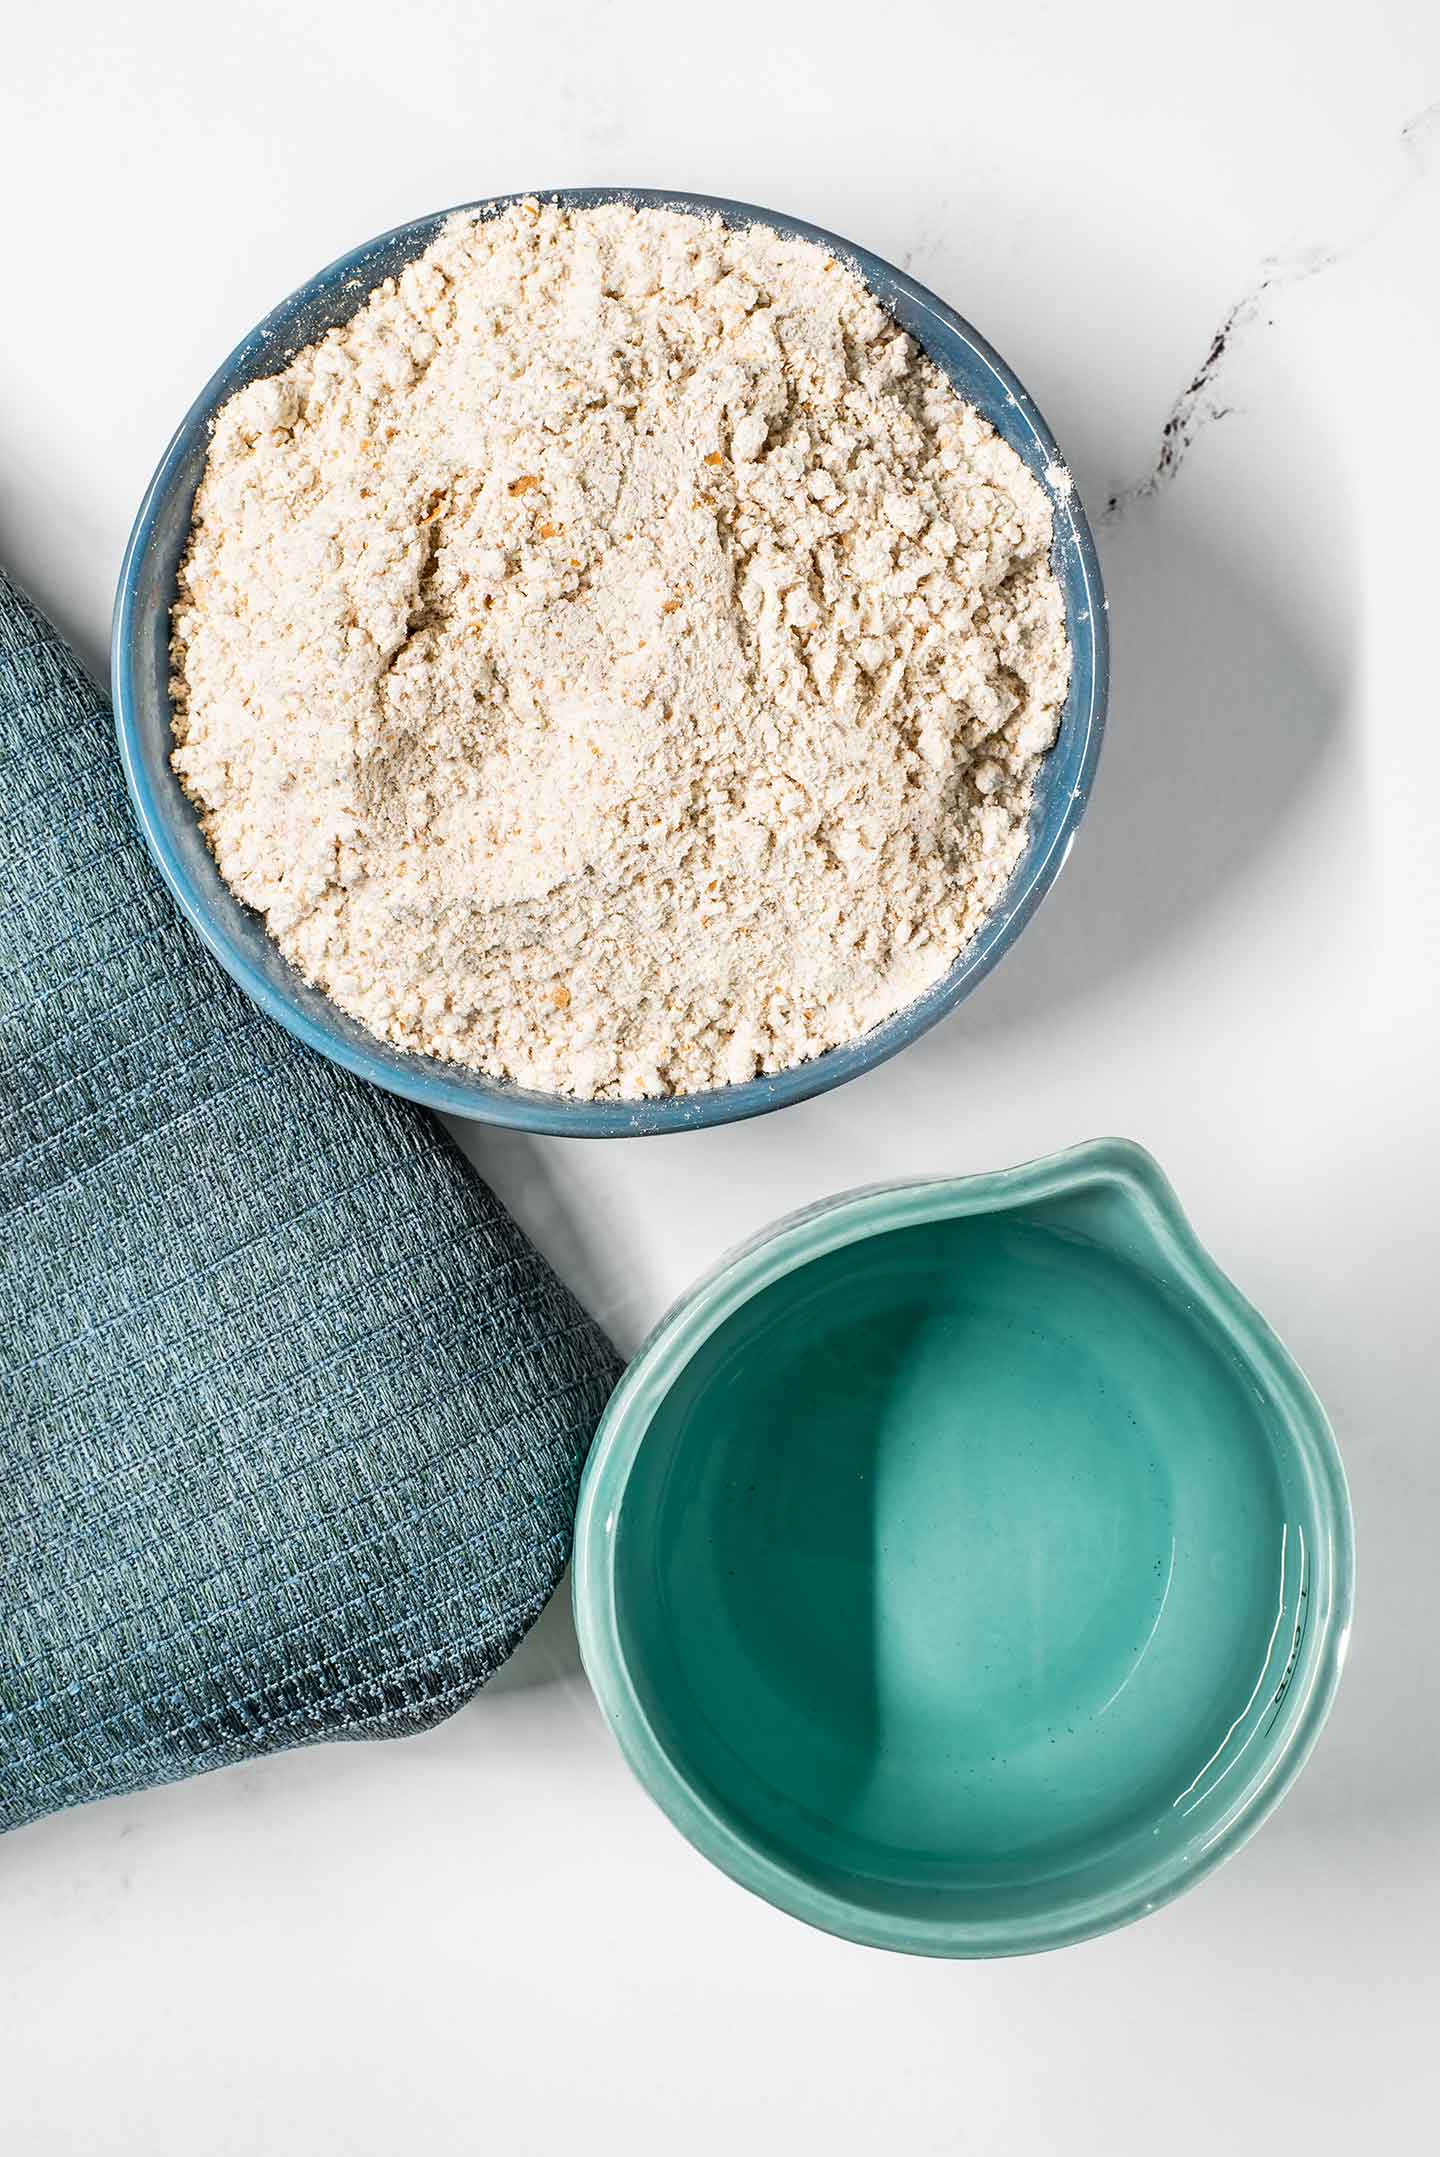 Top down view of whole wheat flour in a dish and a measuring cup of water.